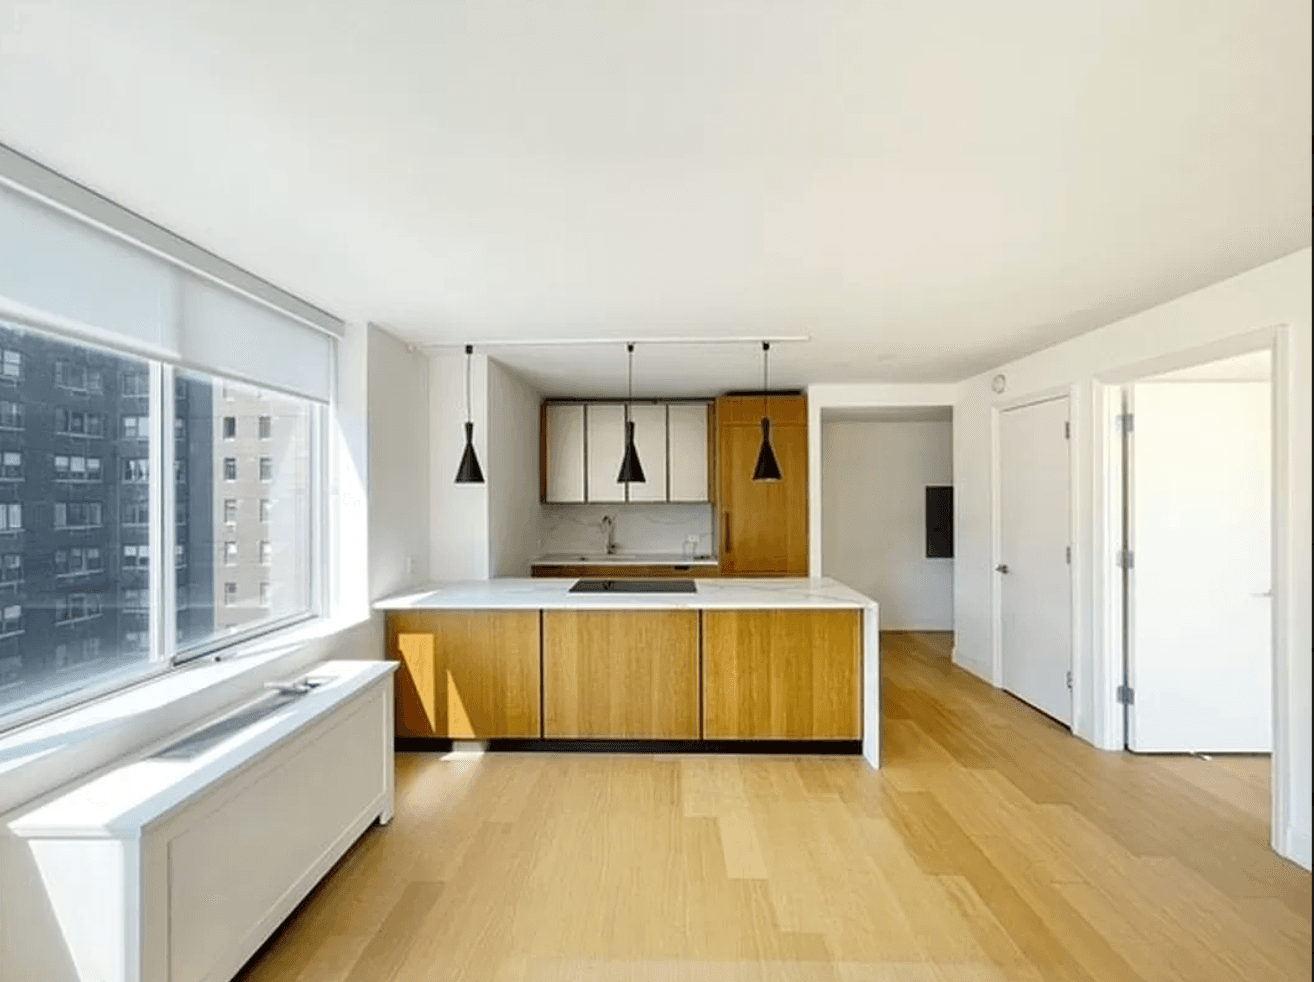 Midtown East 1BD/1BA with Gourmet Kitchen, Bosch Appliances, In-Unit W/D, No Fee